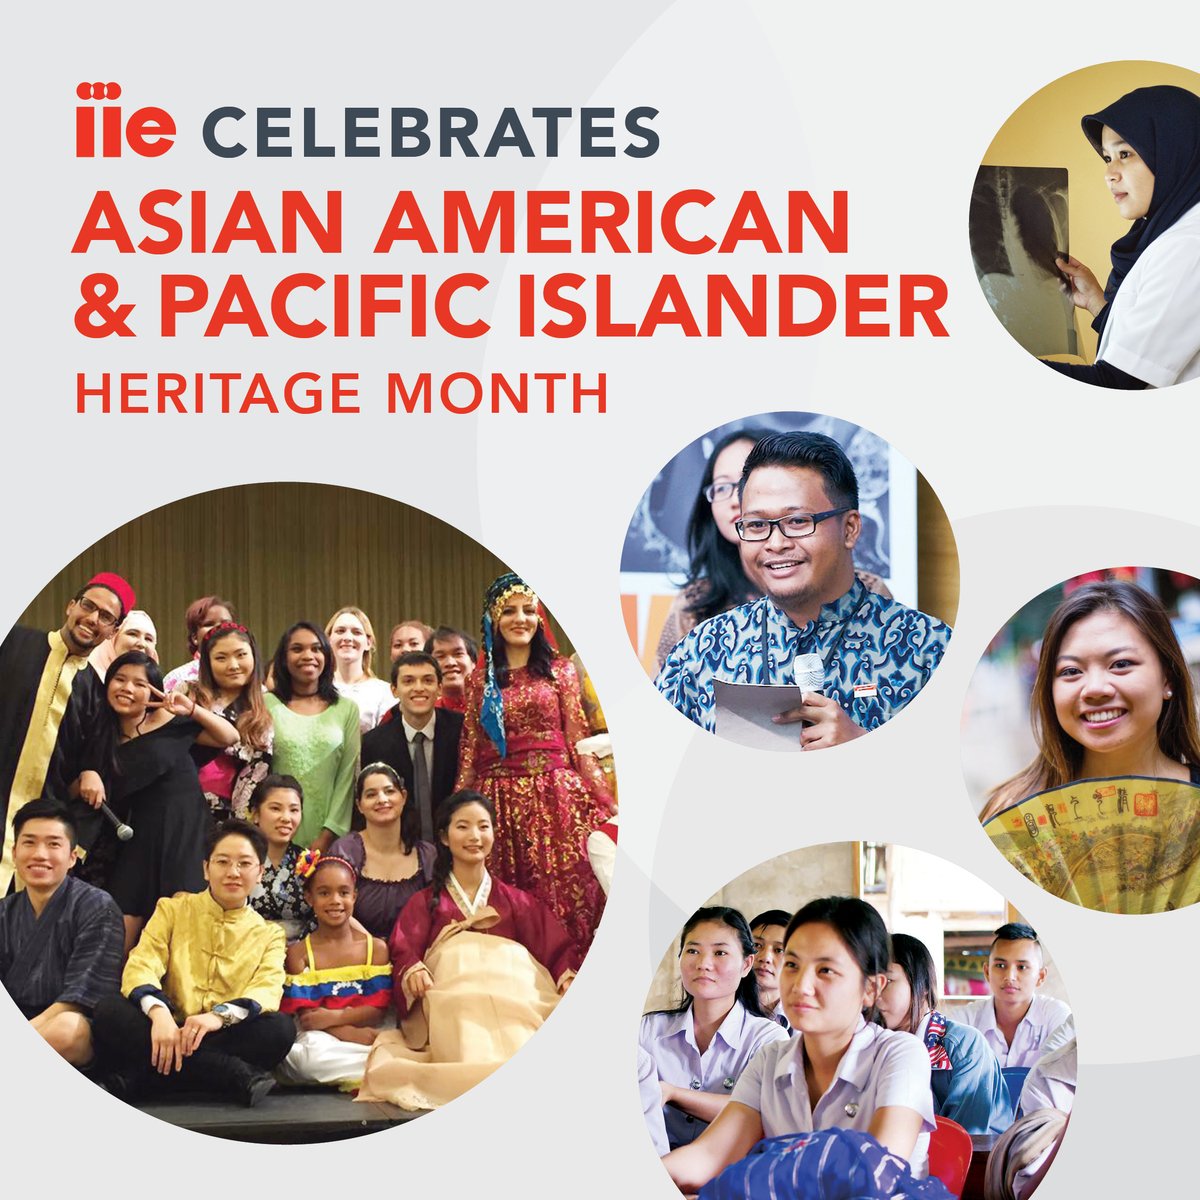 #AAPIHeritageMonth: This month, we are celebrating the contributions that Asian Americans, Native Hawaiians, and Pacific Islanders have made to their communities in the U.S. and across the globe. Stay tuned for highlights during the month!